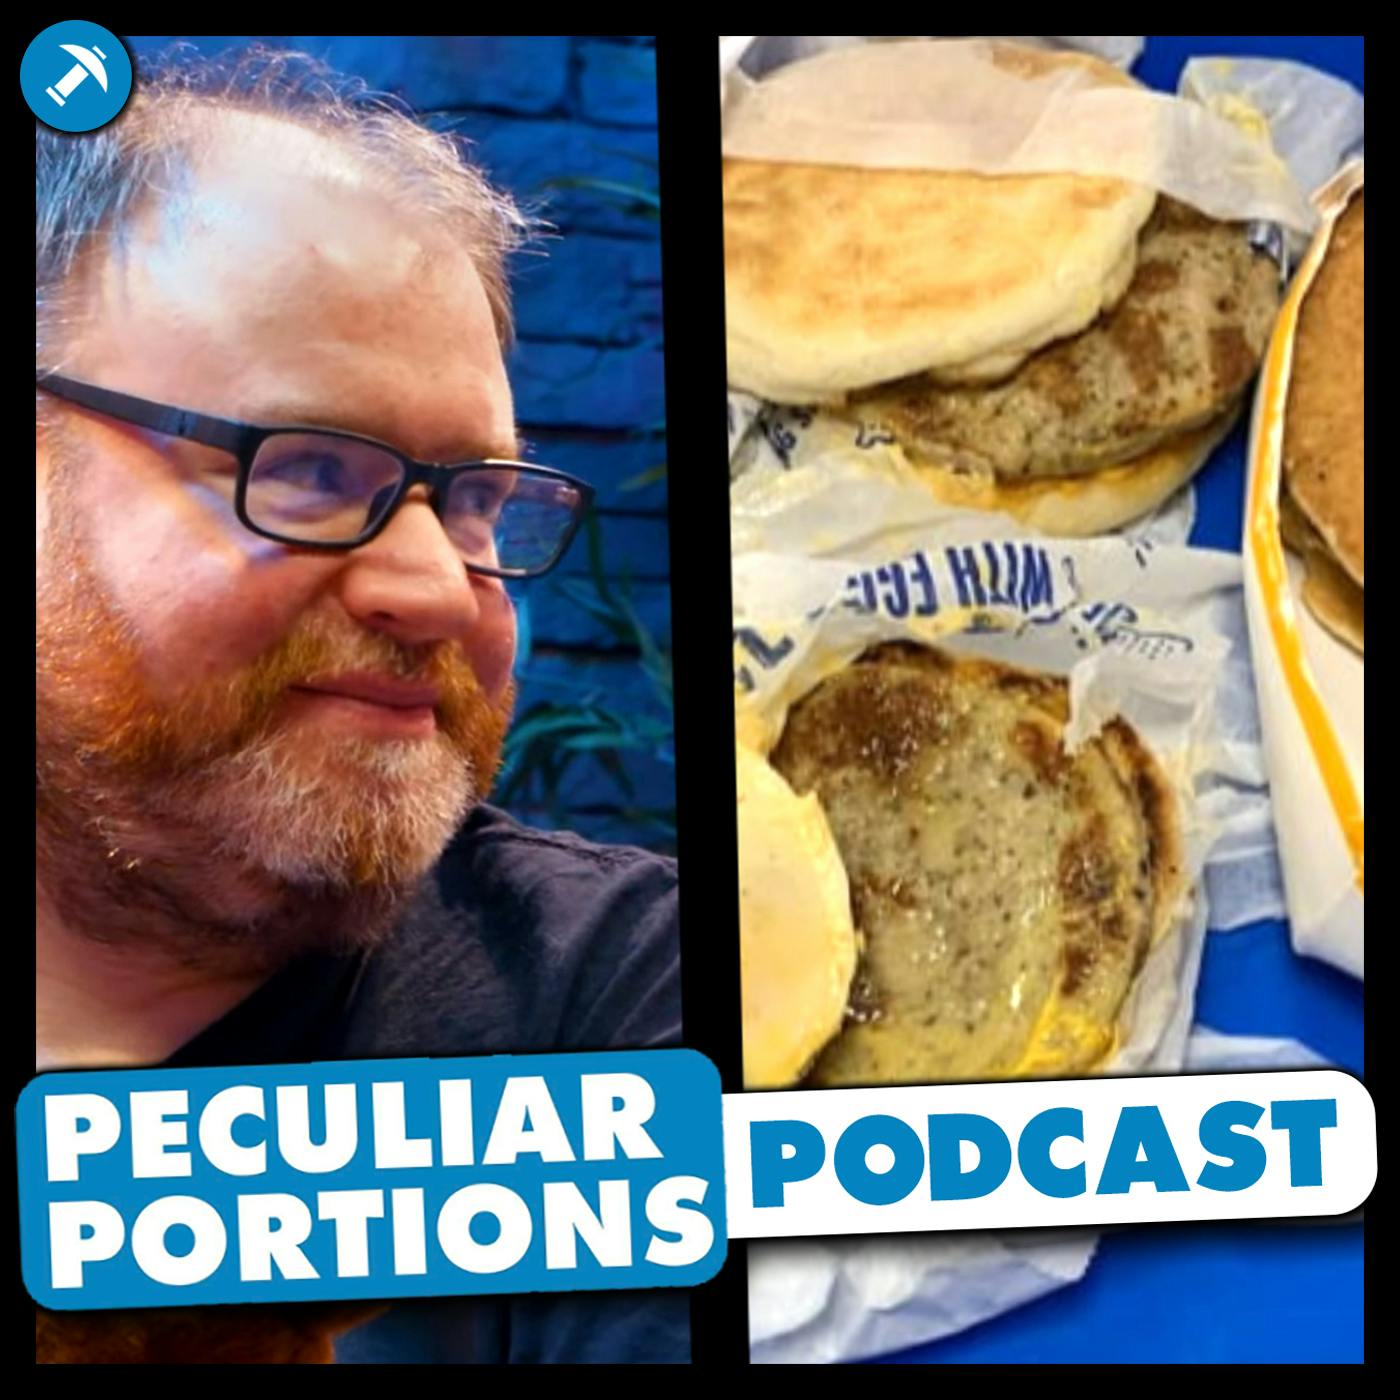 Passenger fined $1,874 for smuggling McMuffins - Simon's Peculiar Portions #68